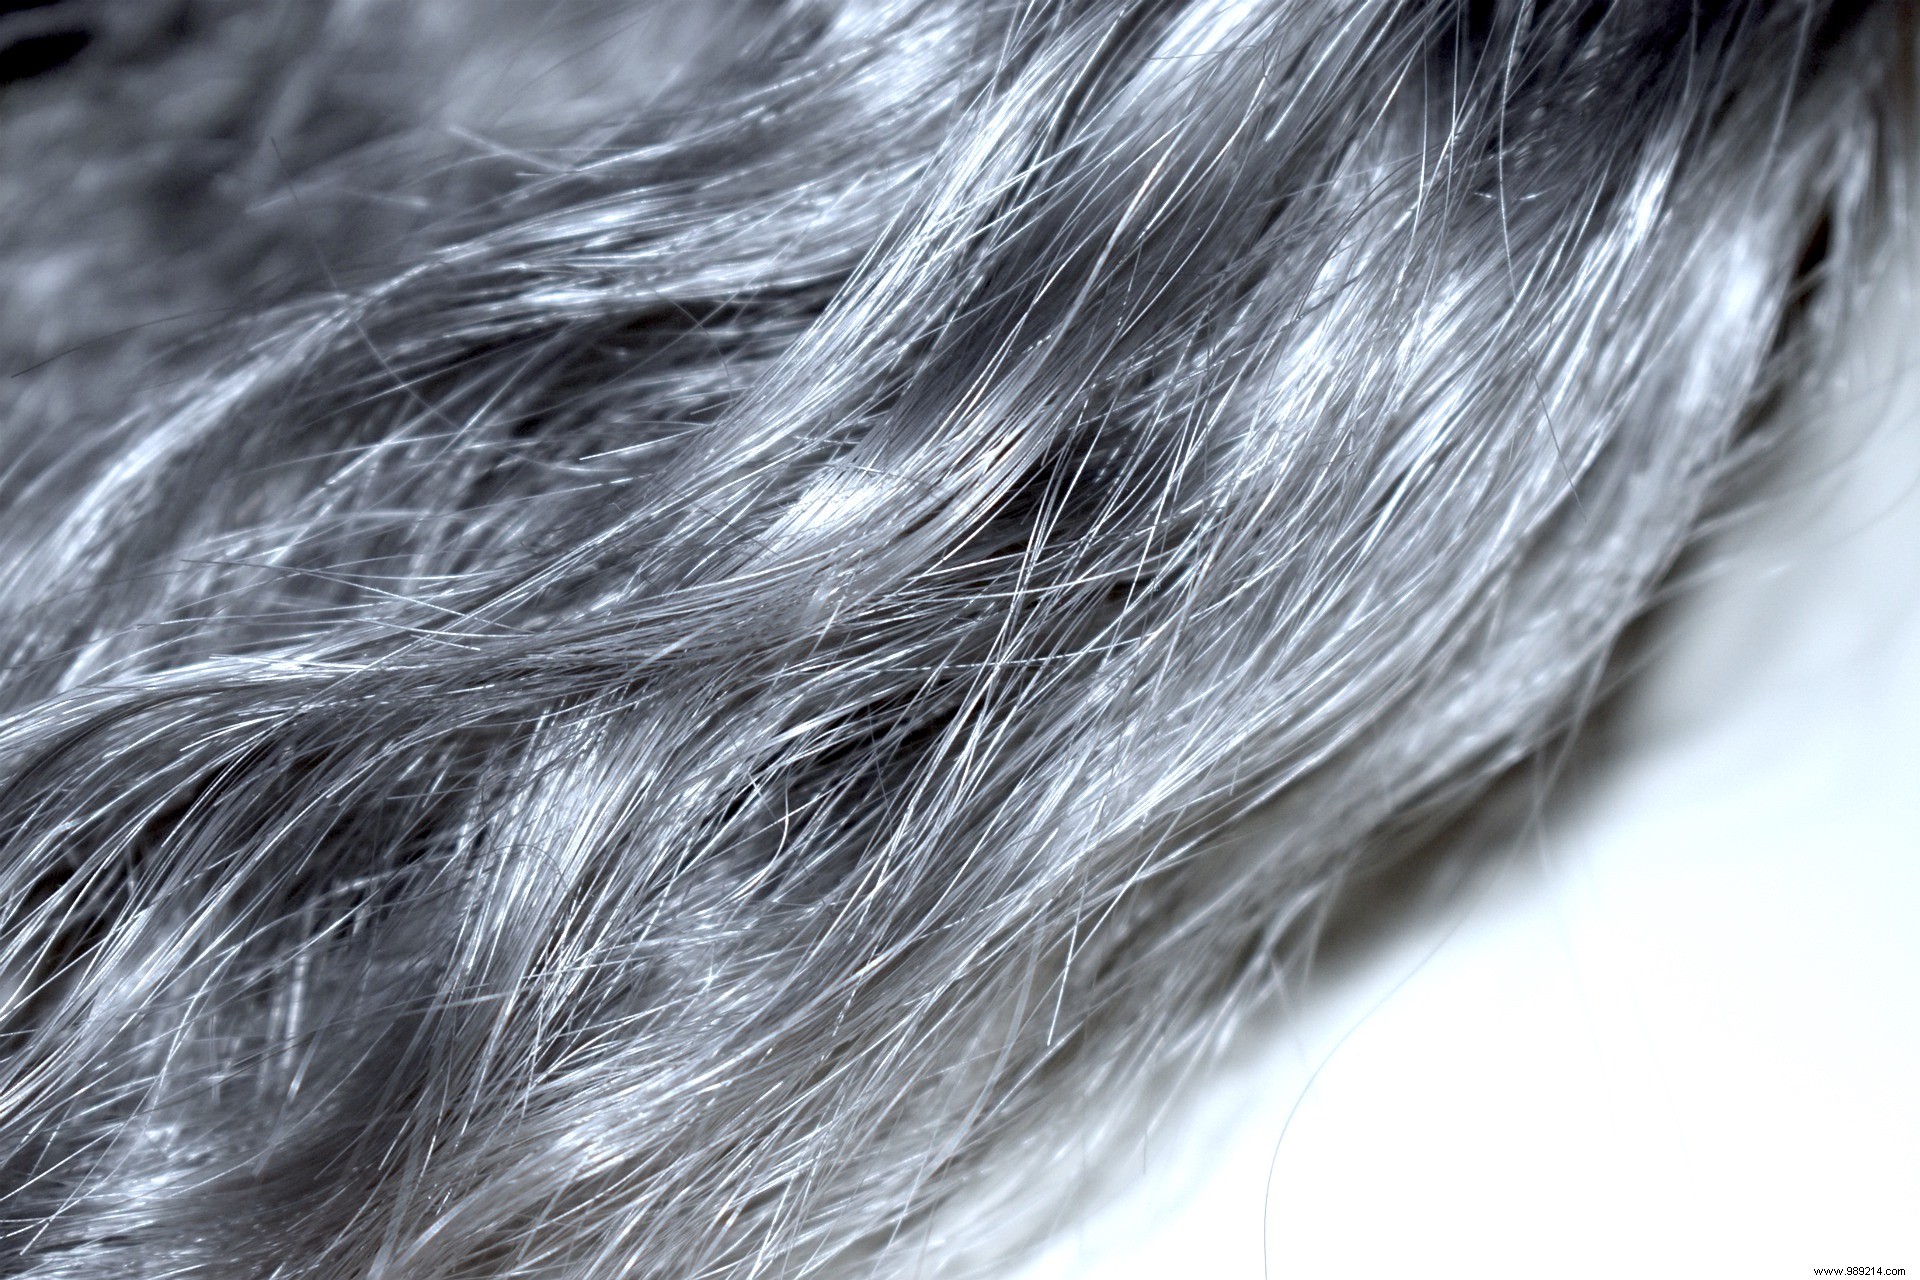 Reducing stress can sometimes reverse gray hair, study finds 